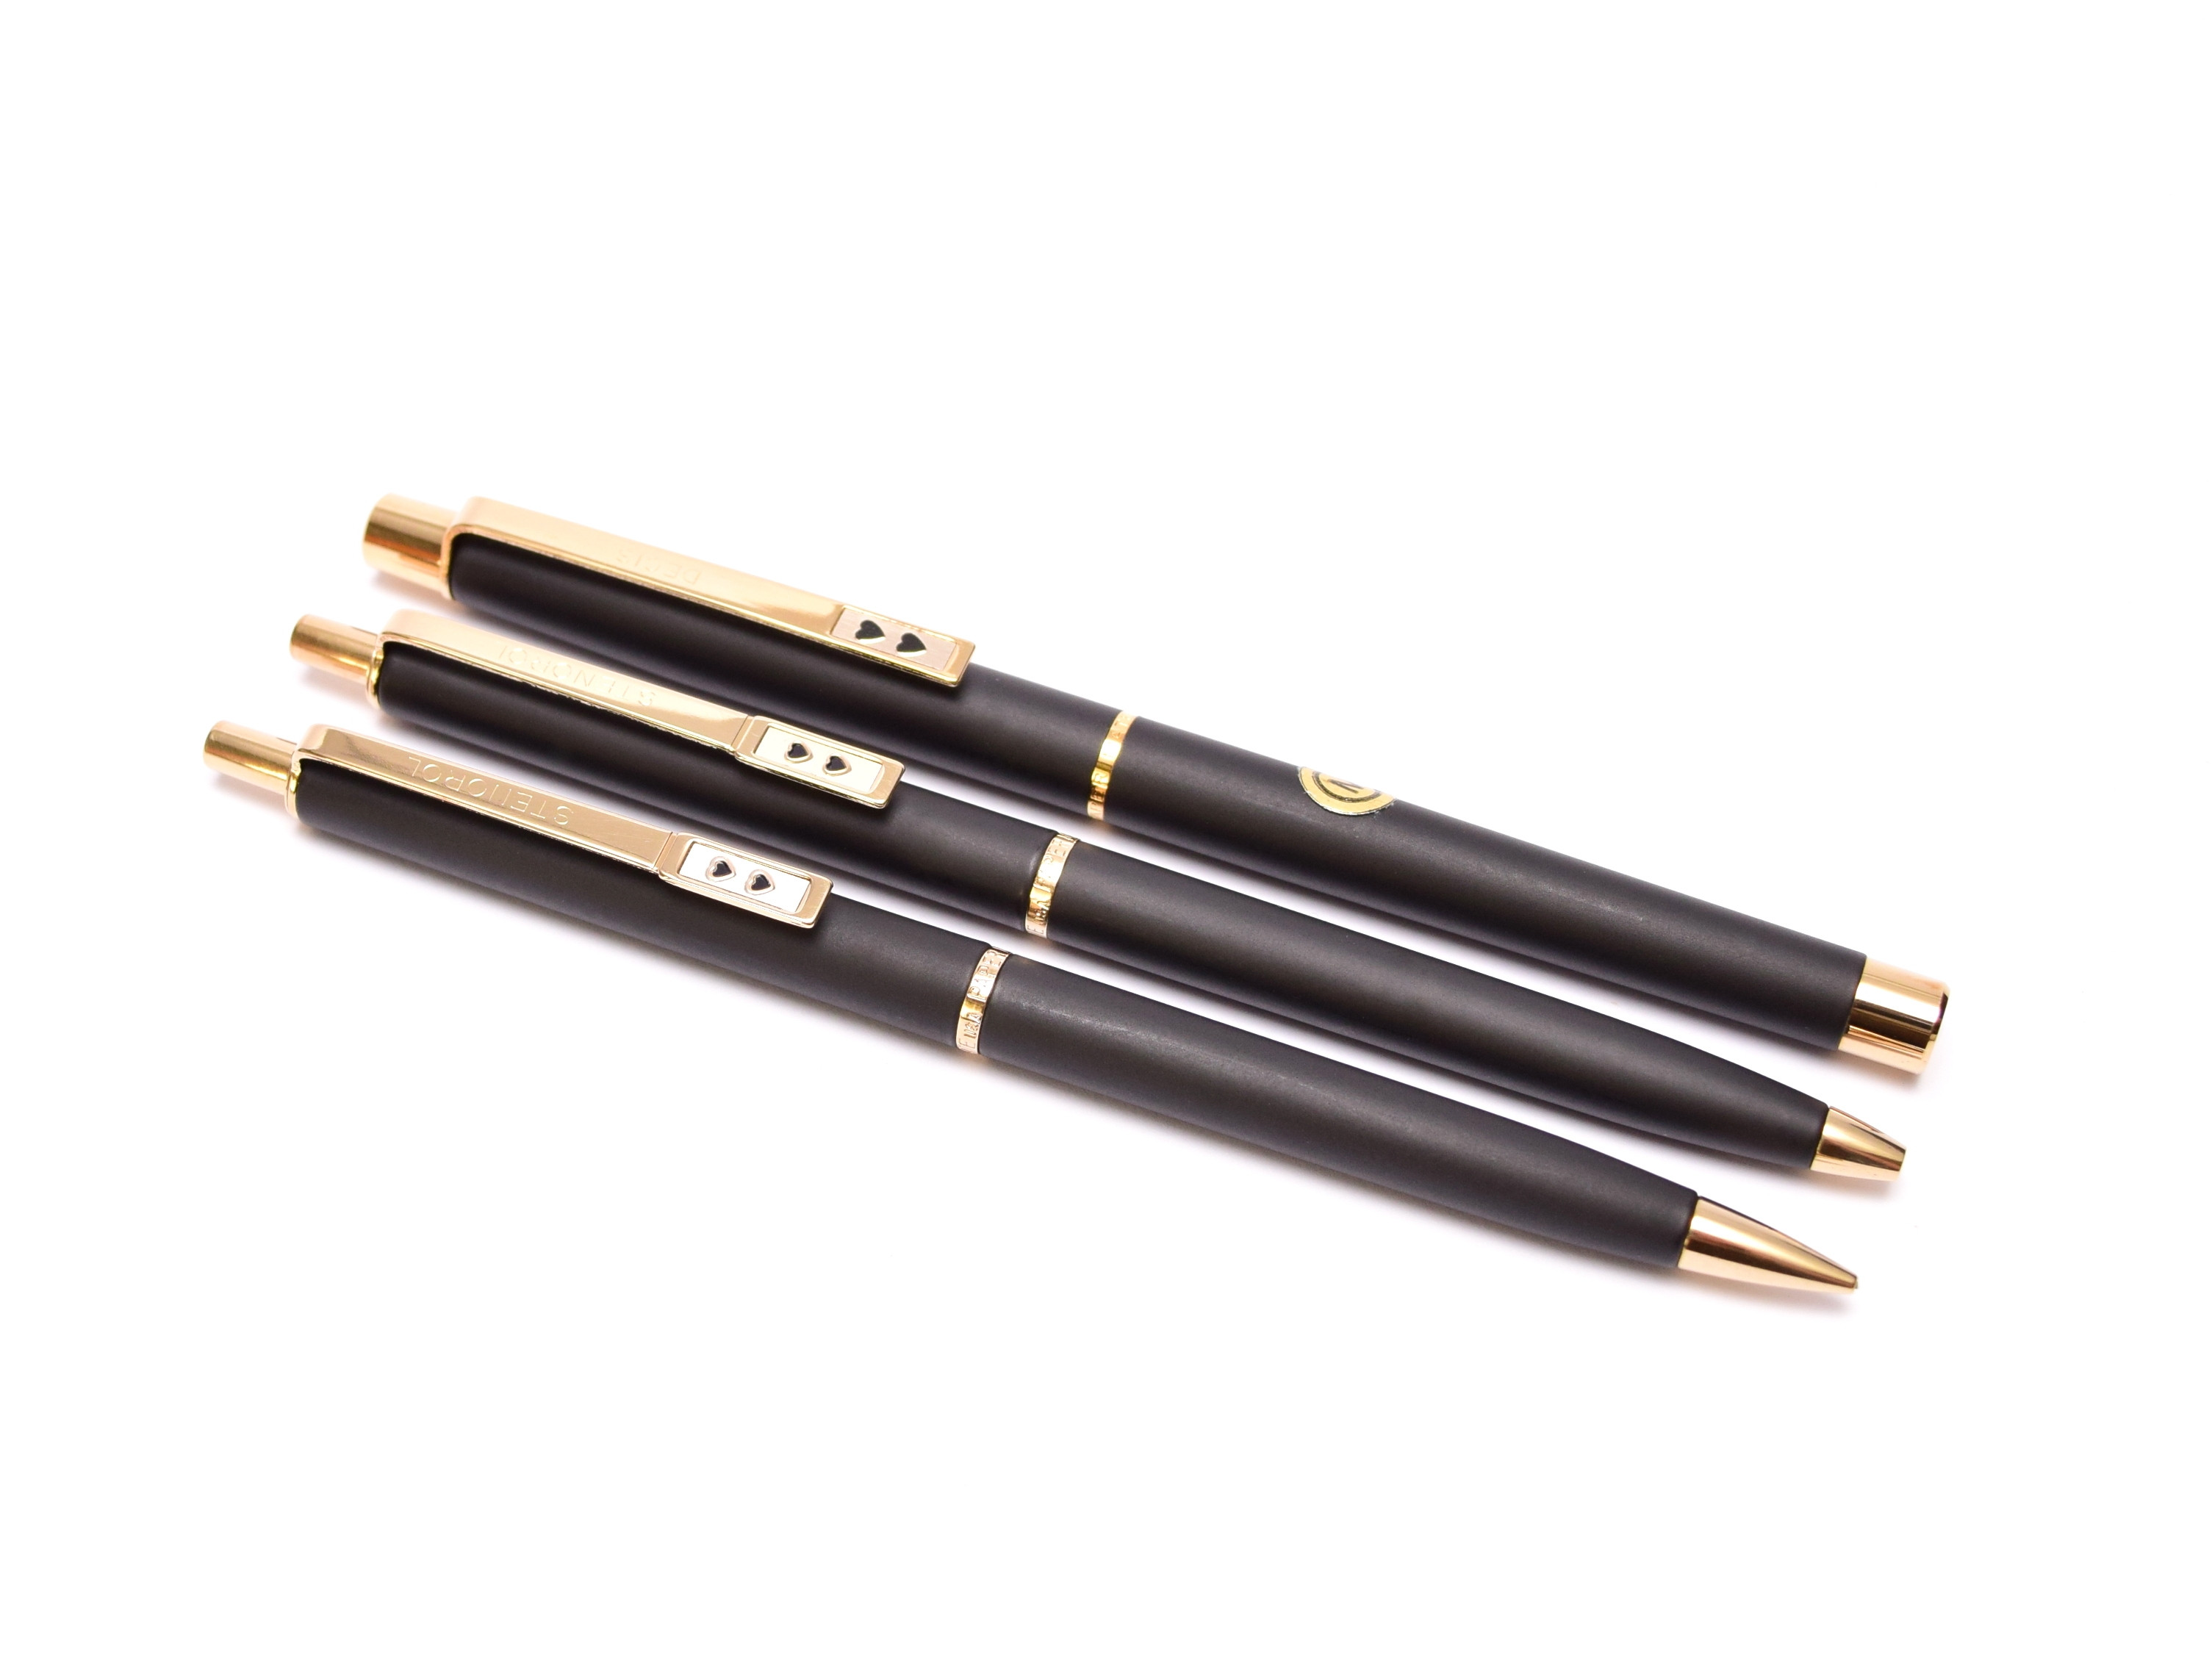  Paper Mate Fountain Pen Brushed Gold Plated Fountain Pen  Medium Nib : Office Products